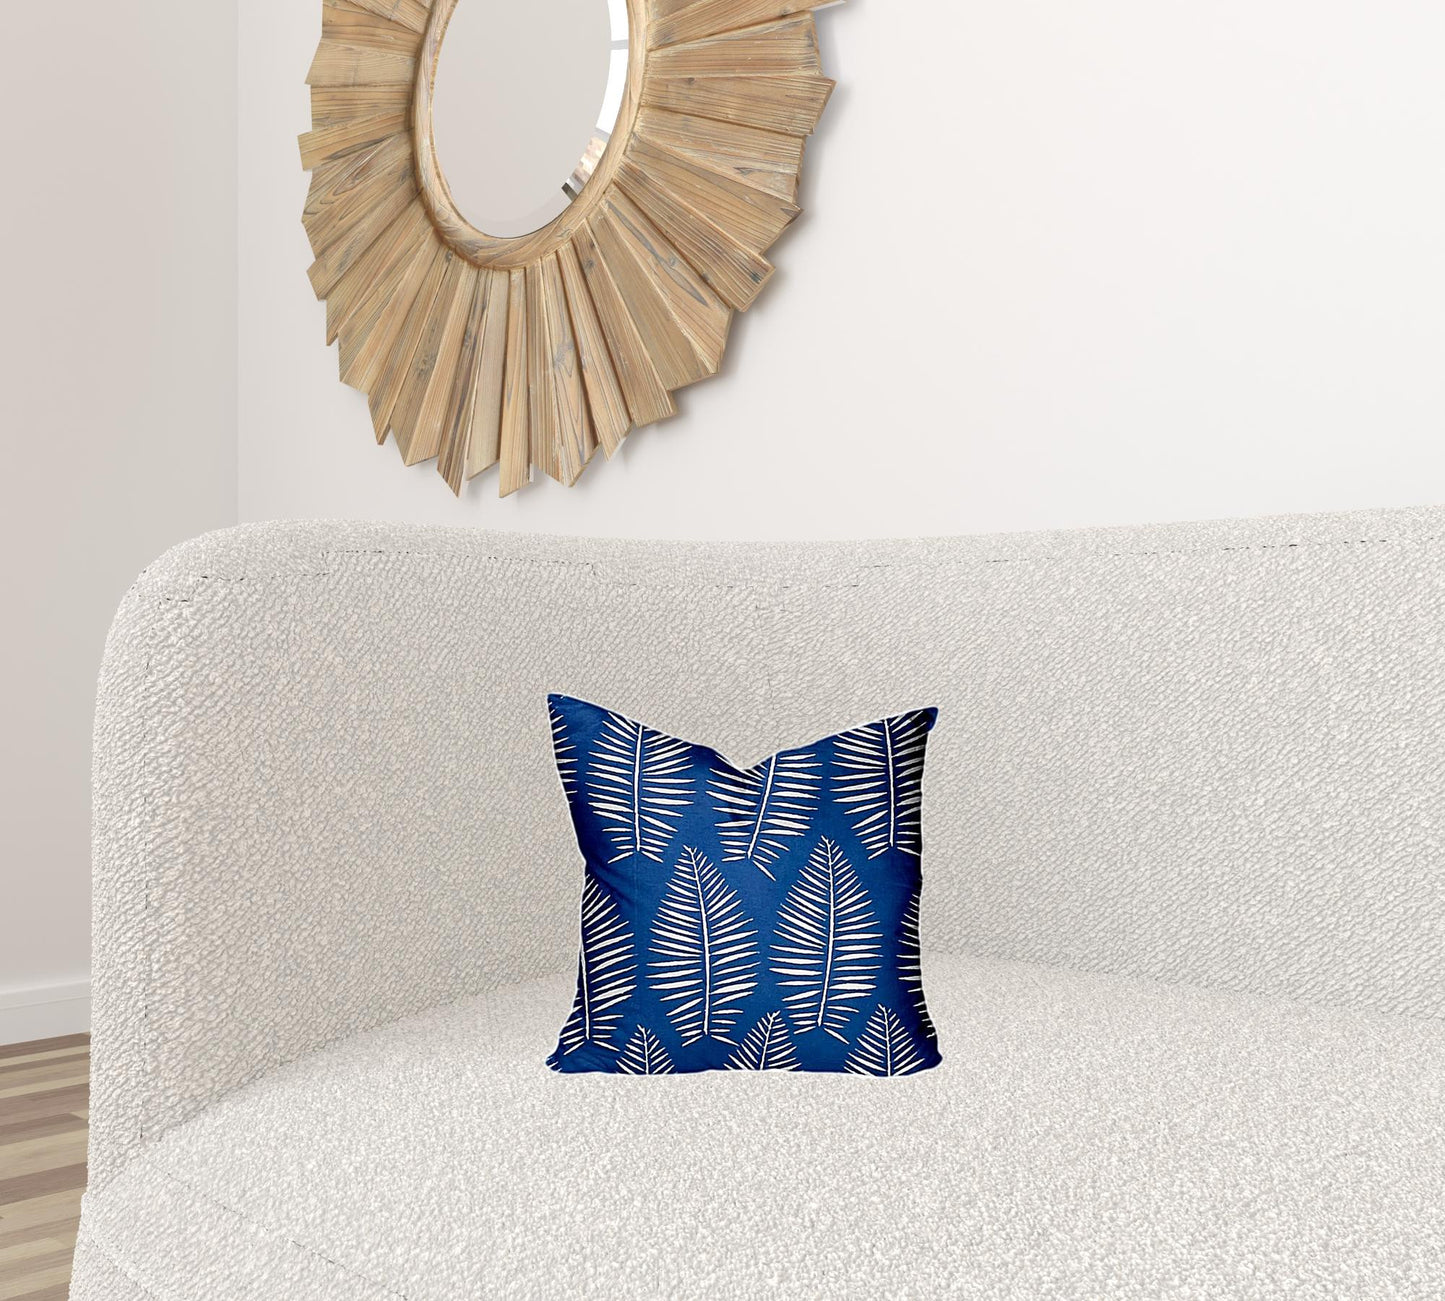 14" X 14" Blue And White Zippered Tropical Throw Indoor Outdoor Pillow Cover